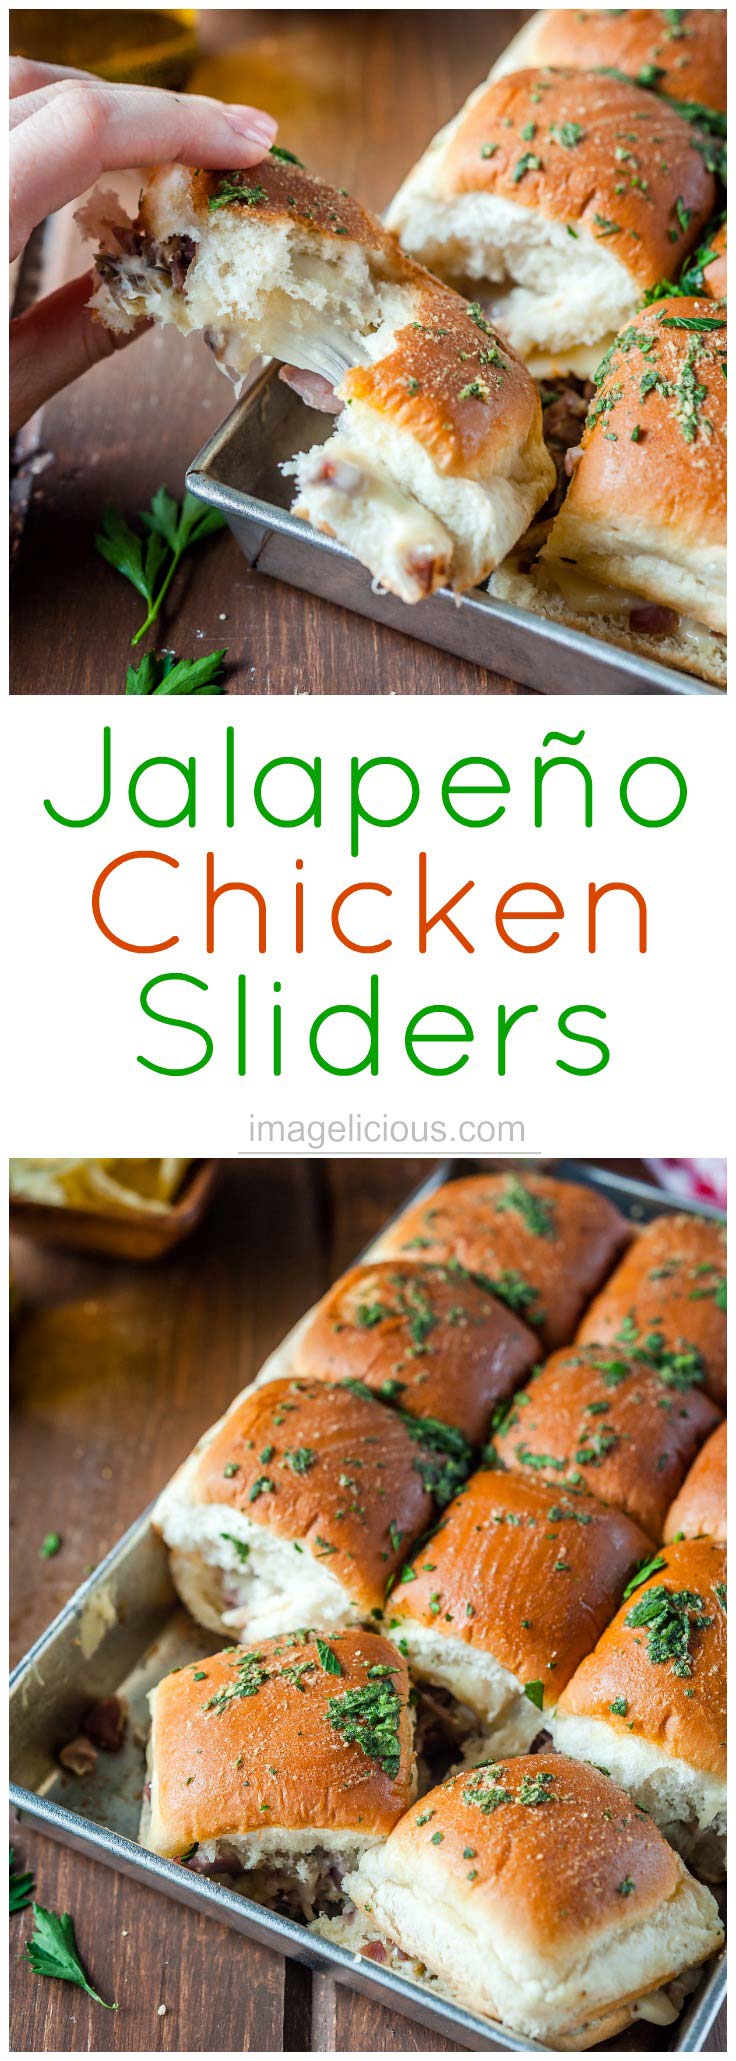 Jalapeno Chicken Sliders are an ultimate lunch, dinner, or party treat! Easy and quick to make with leftover chicken. Cheesy, salty, spicy, delicious | Imagelicious